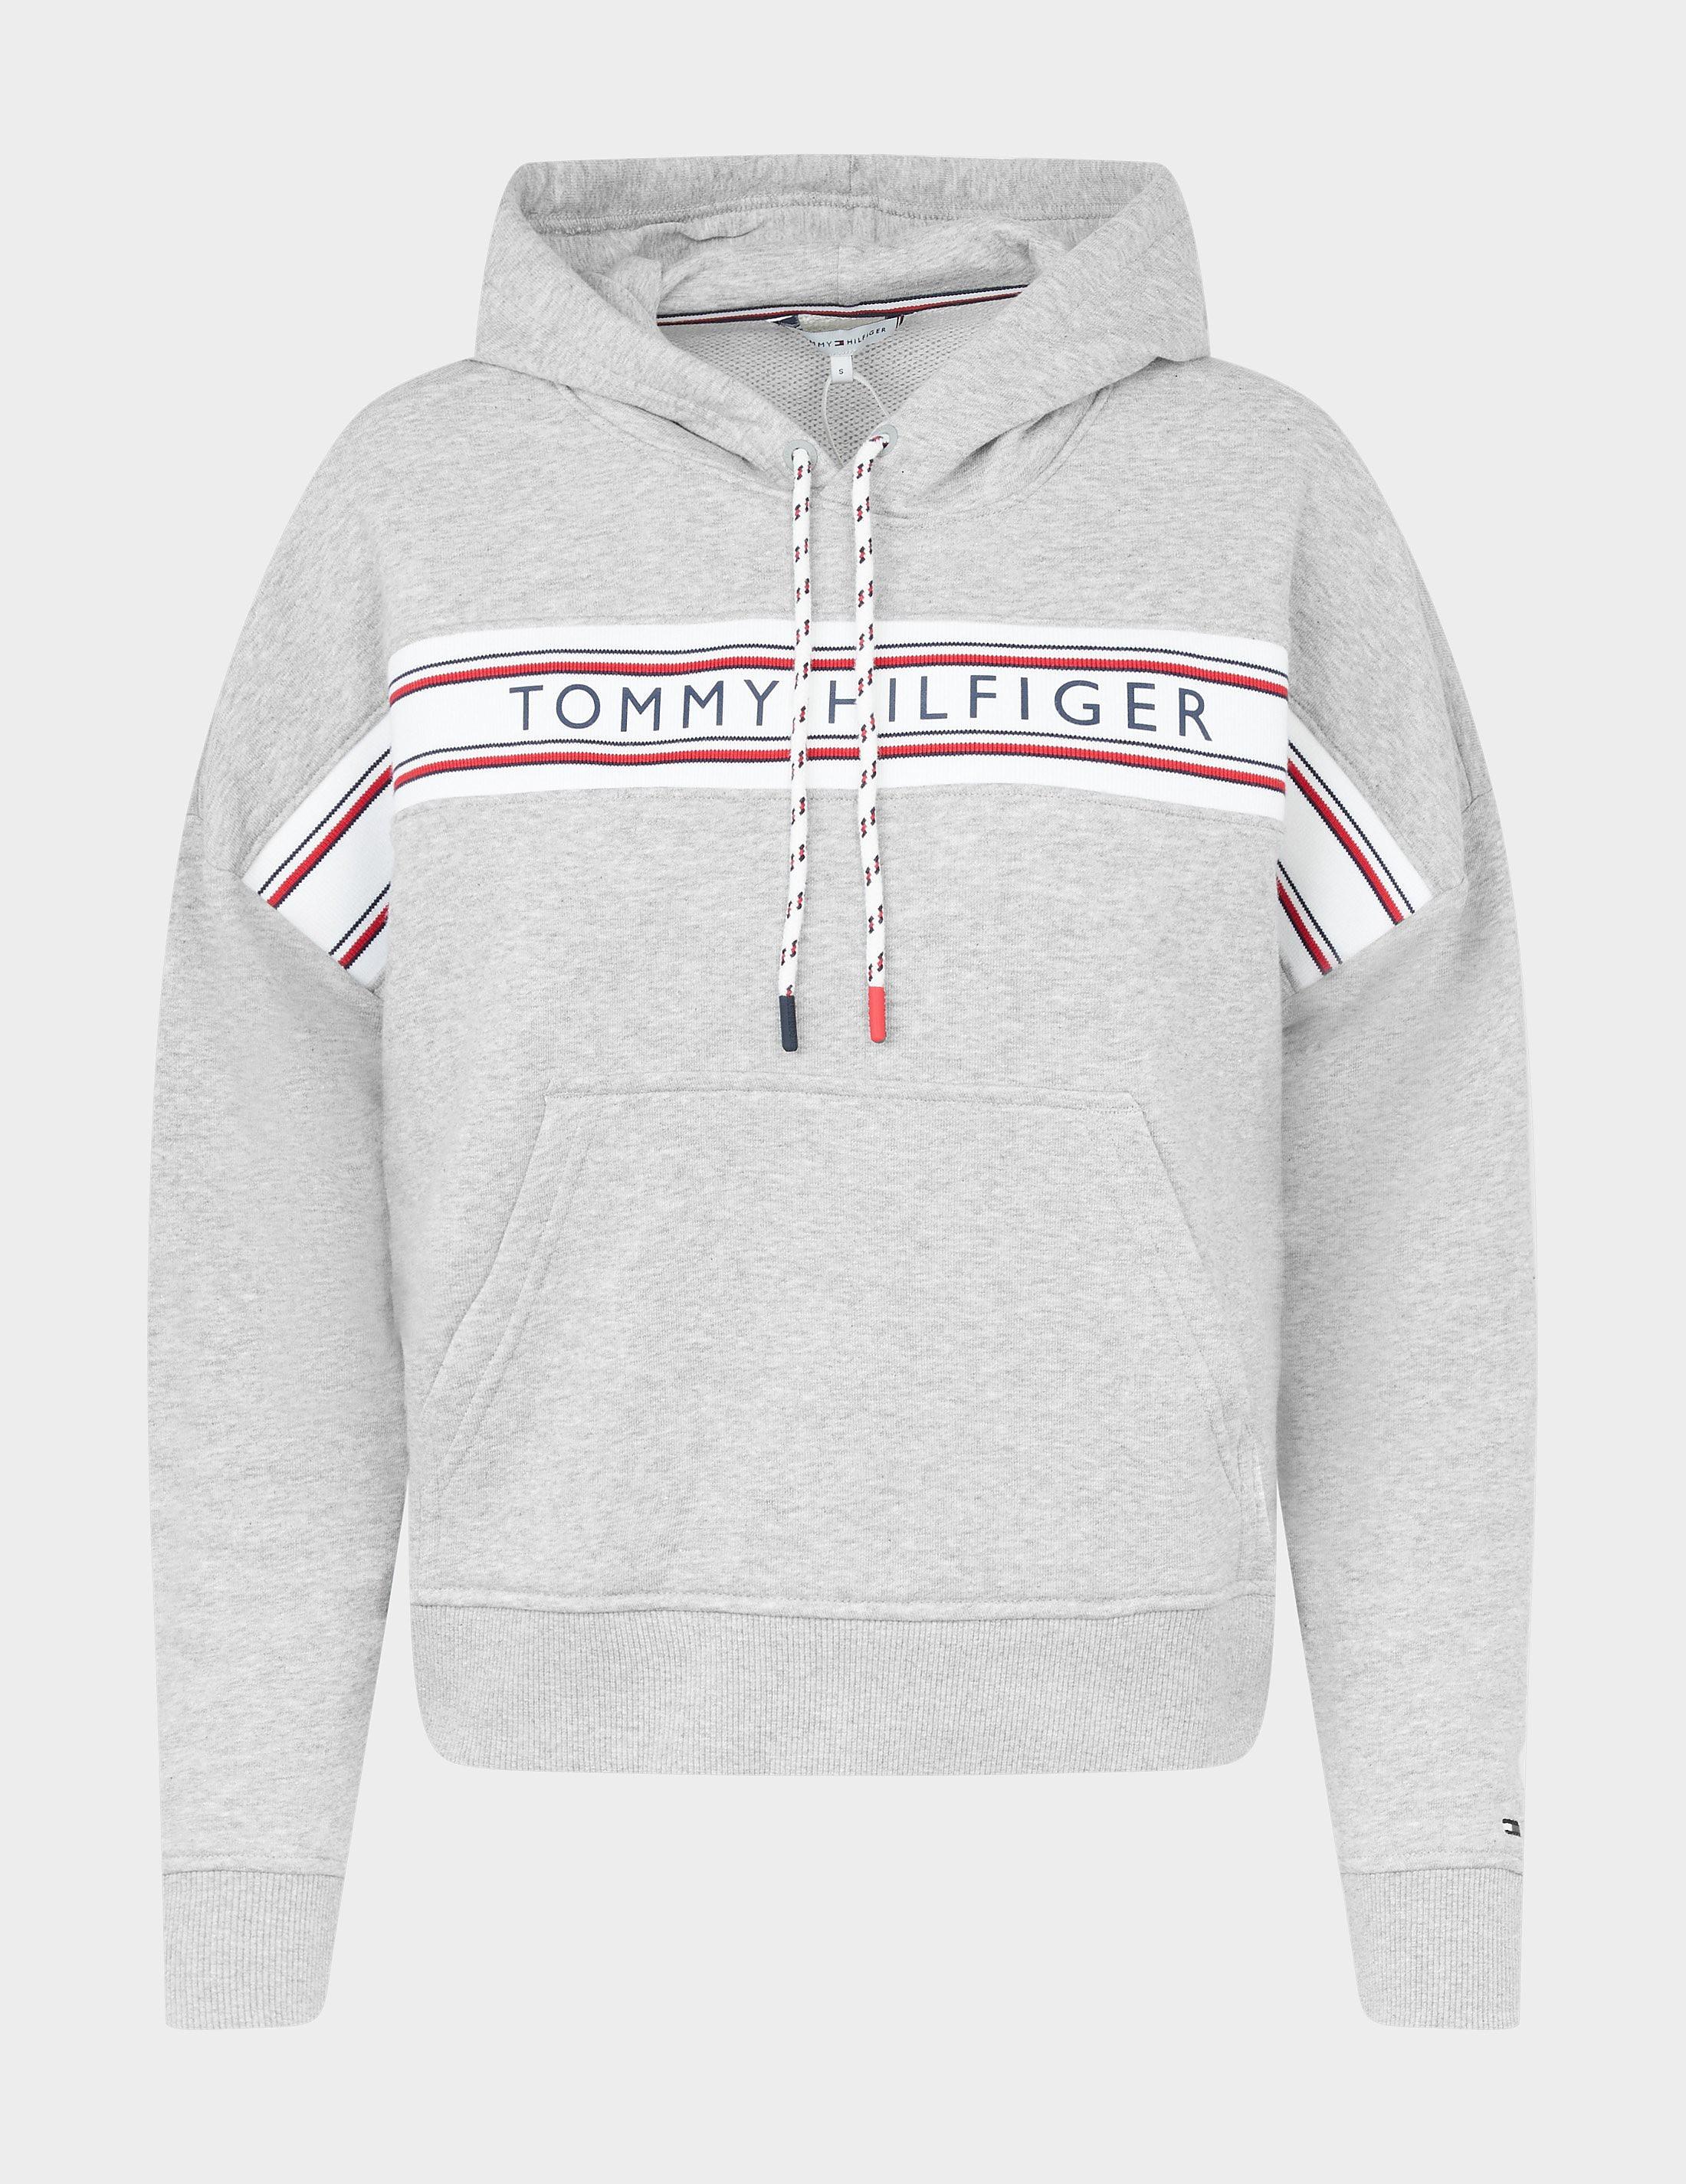 Tommy Hilfiger Lounge Tape Hoodie in Gray | Lyst